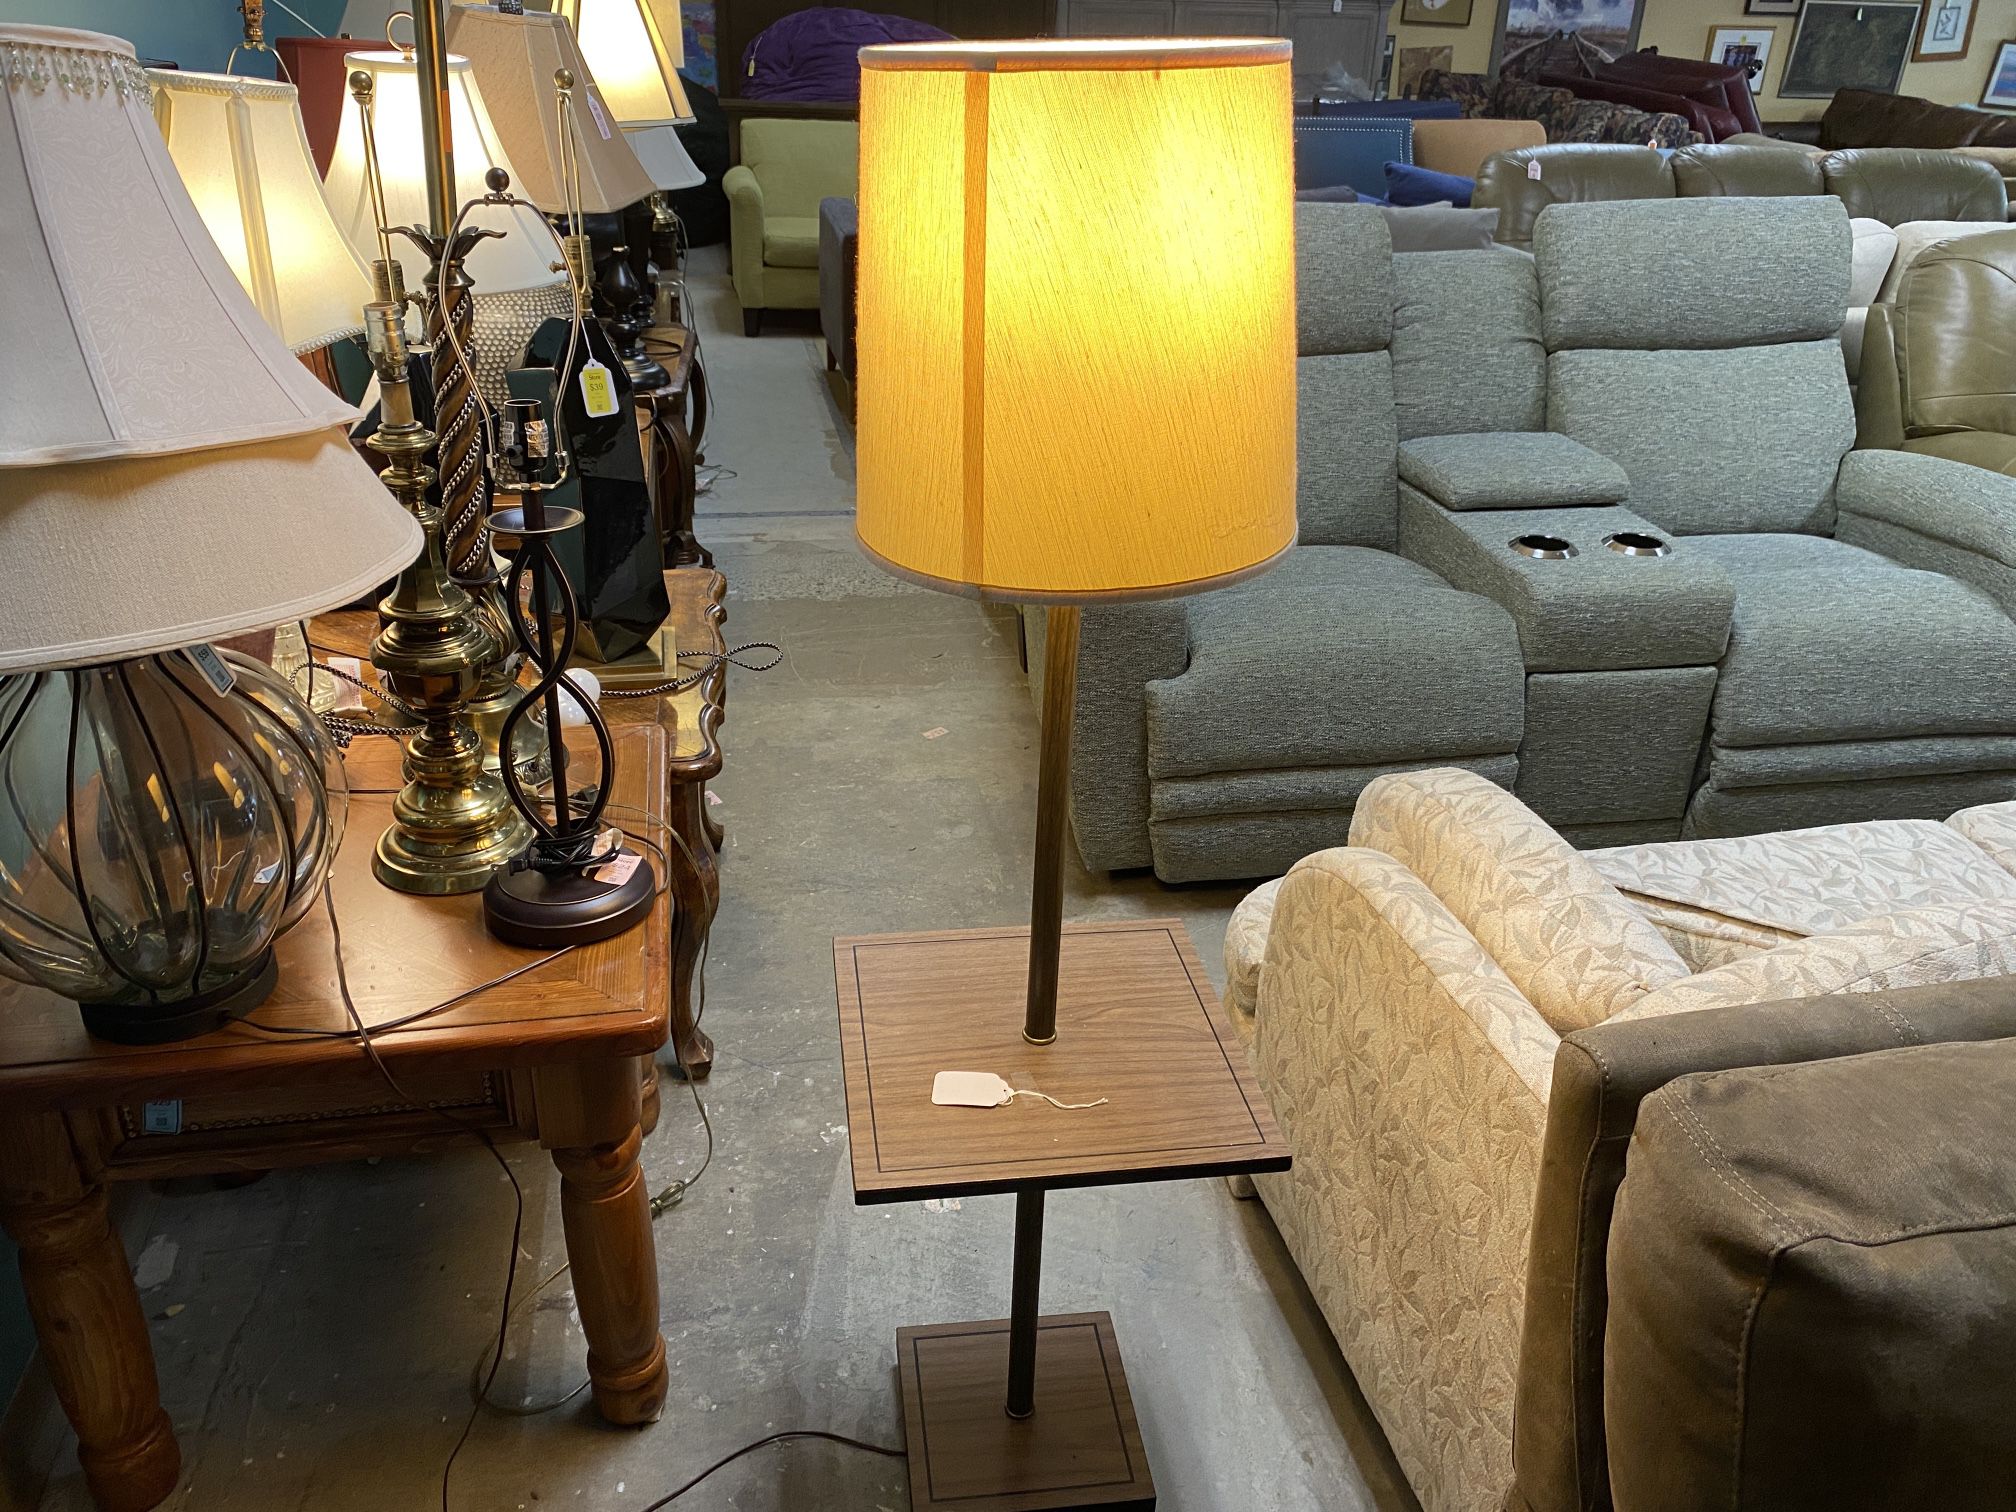 Lamp w/ Square Wood Table